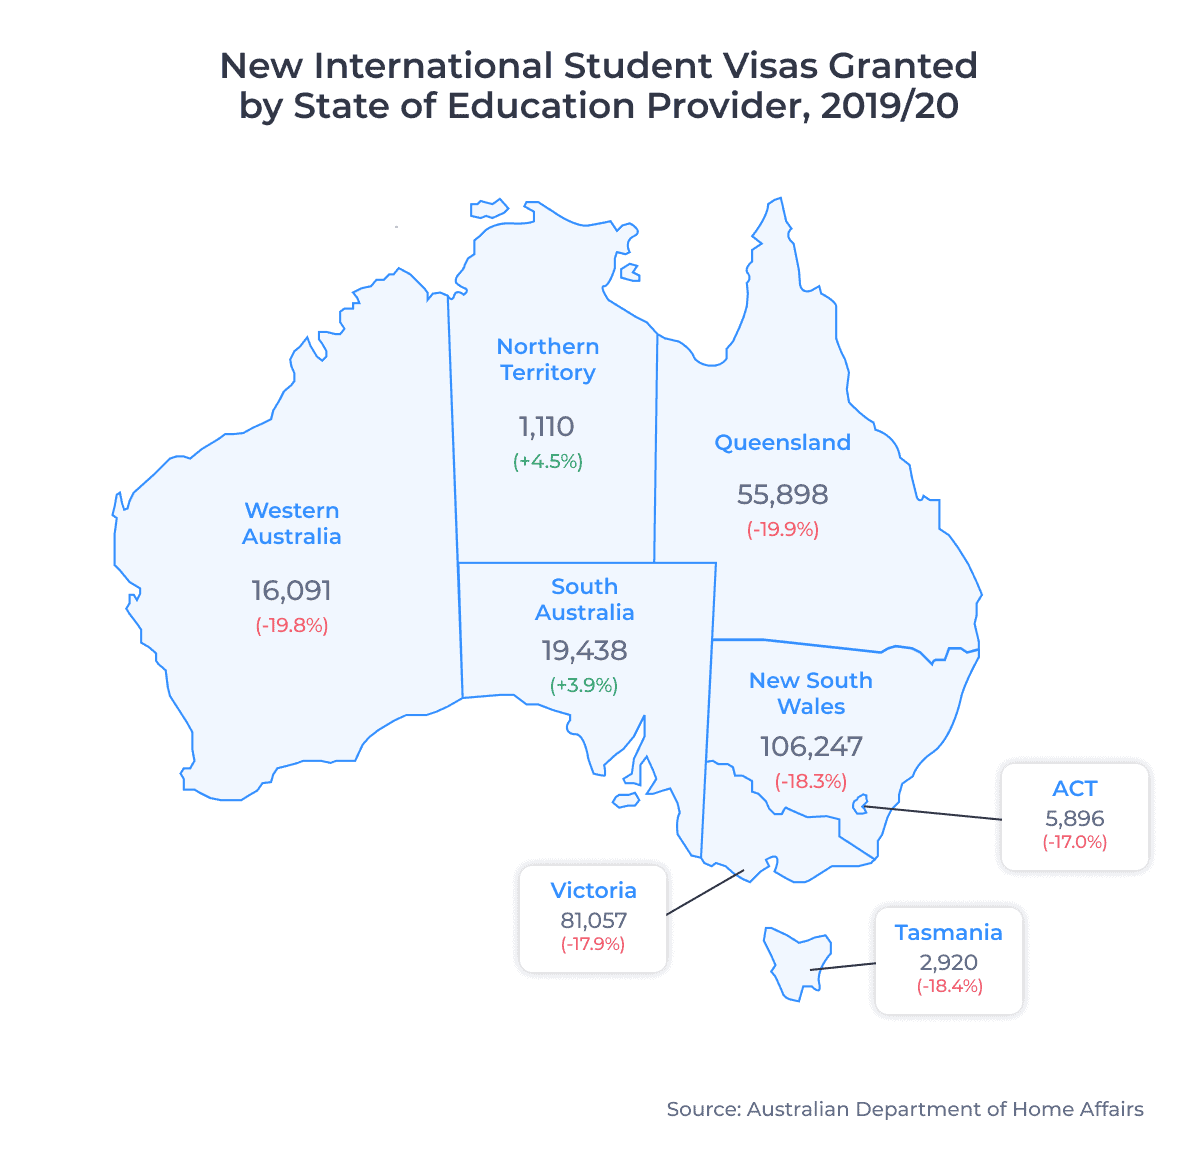 New International Student Visas Granted by State of Education Provider, 2019/20